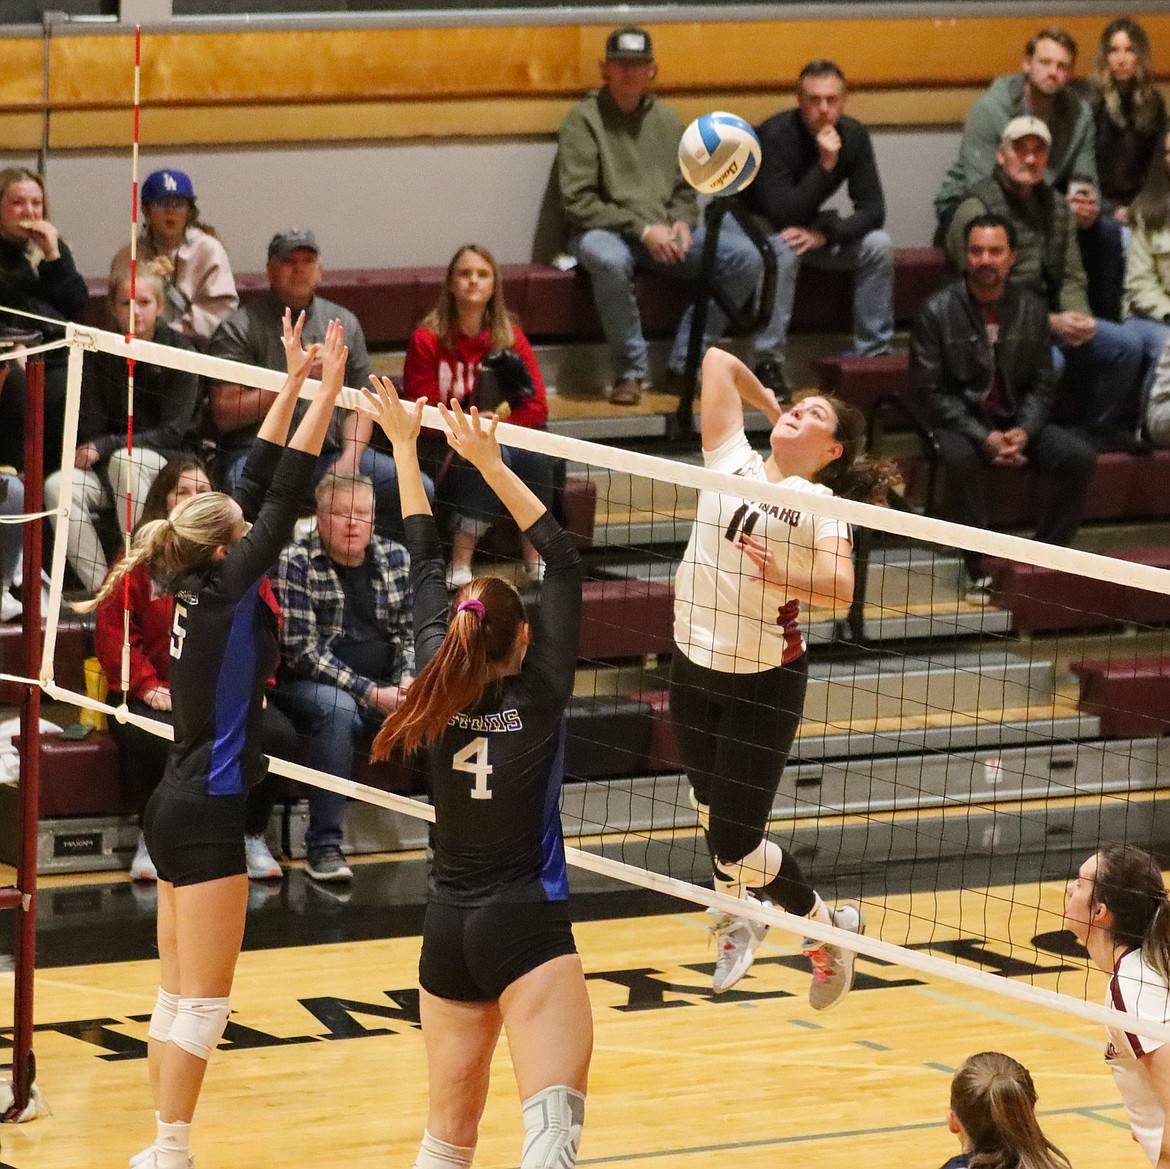 NIC ROUNDUP: Cardinal volleyball team advances to Elite 8 | Coeur d ...